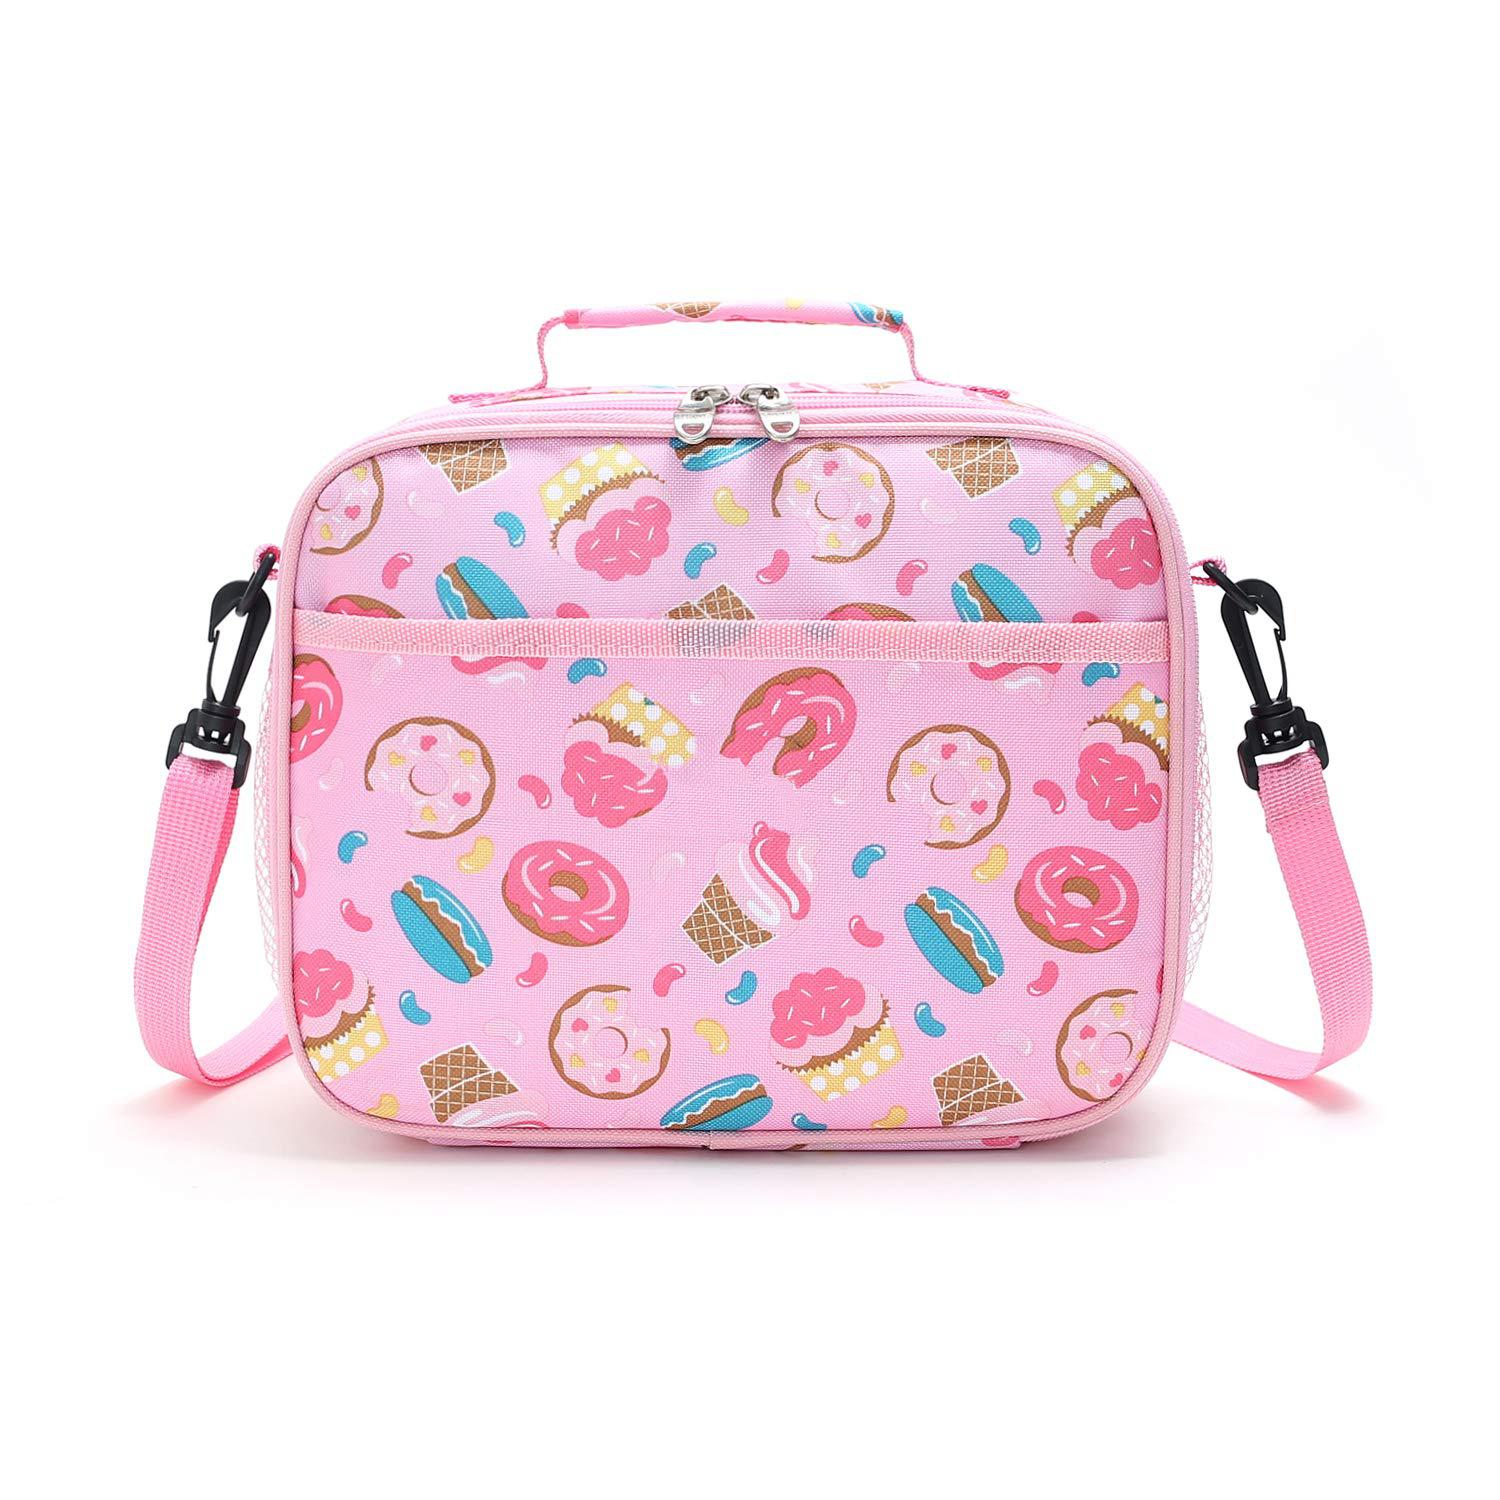 BOMMM girls lunch box, kids lunch bag, thermal lunch bag for school camping  picnic work hiking beach, snack candy donut box toddler